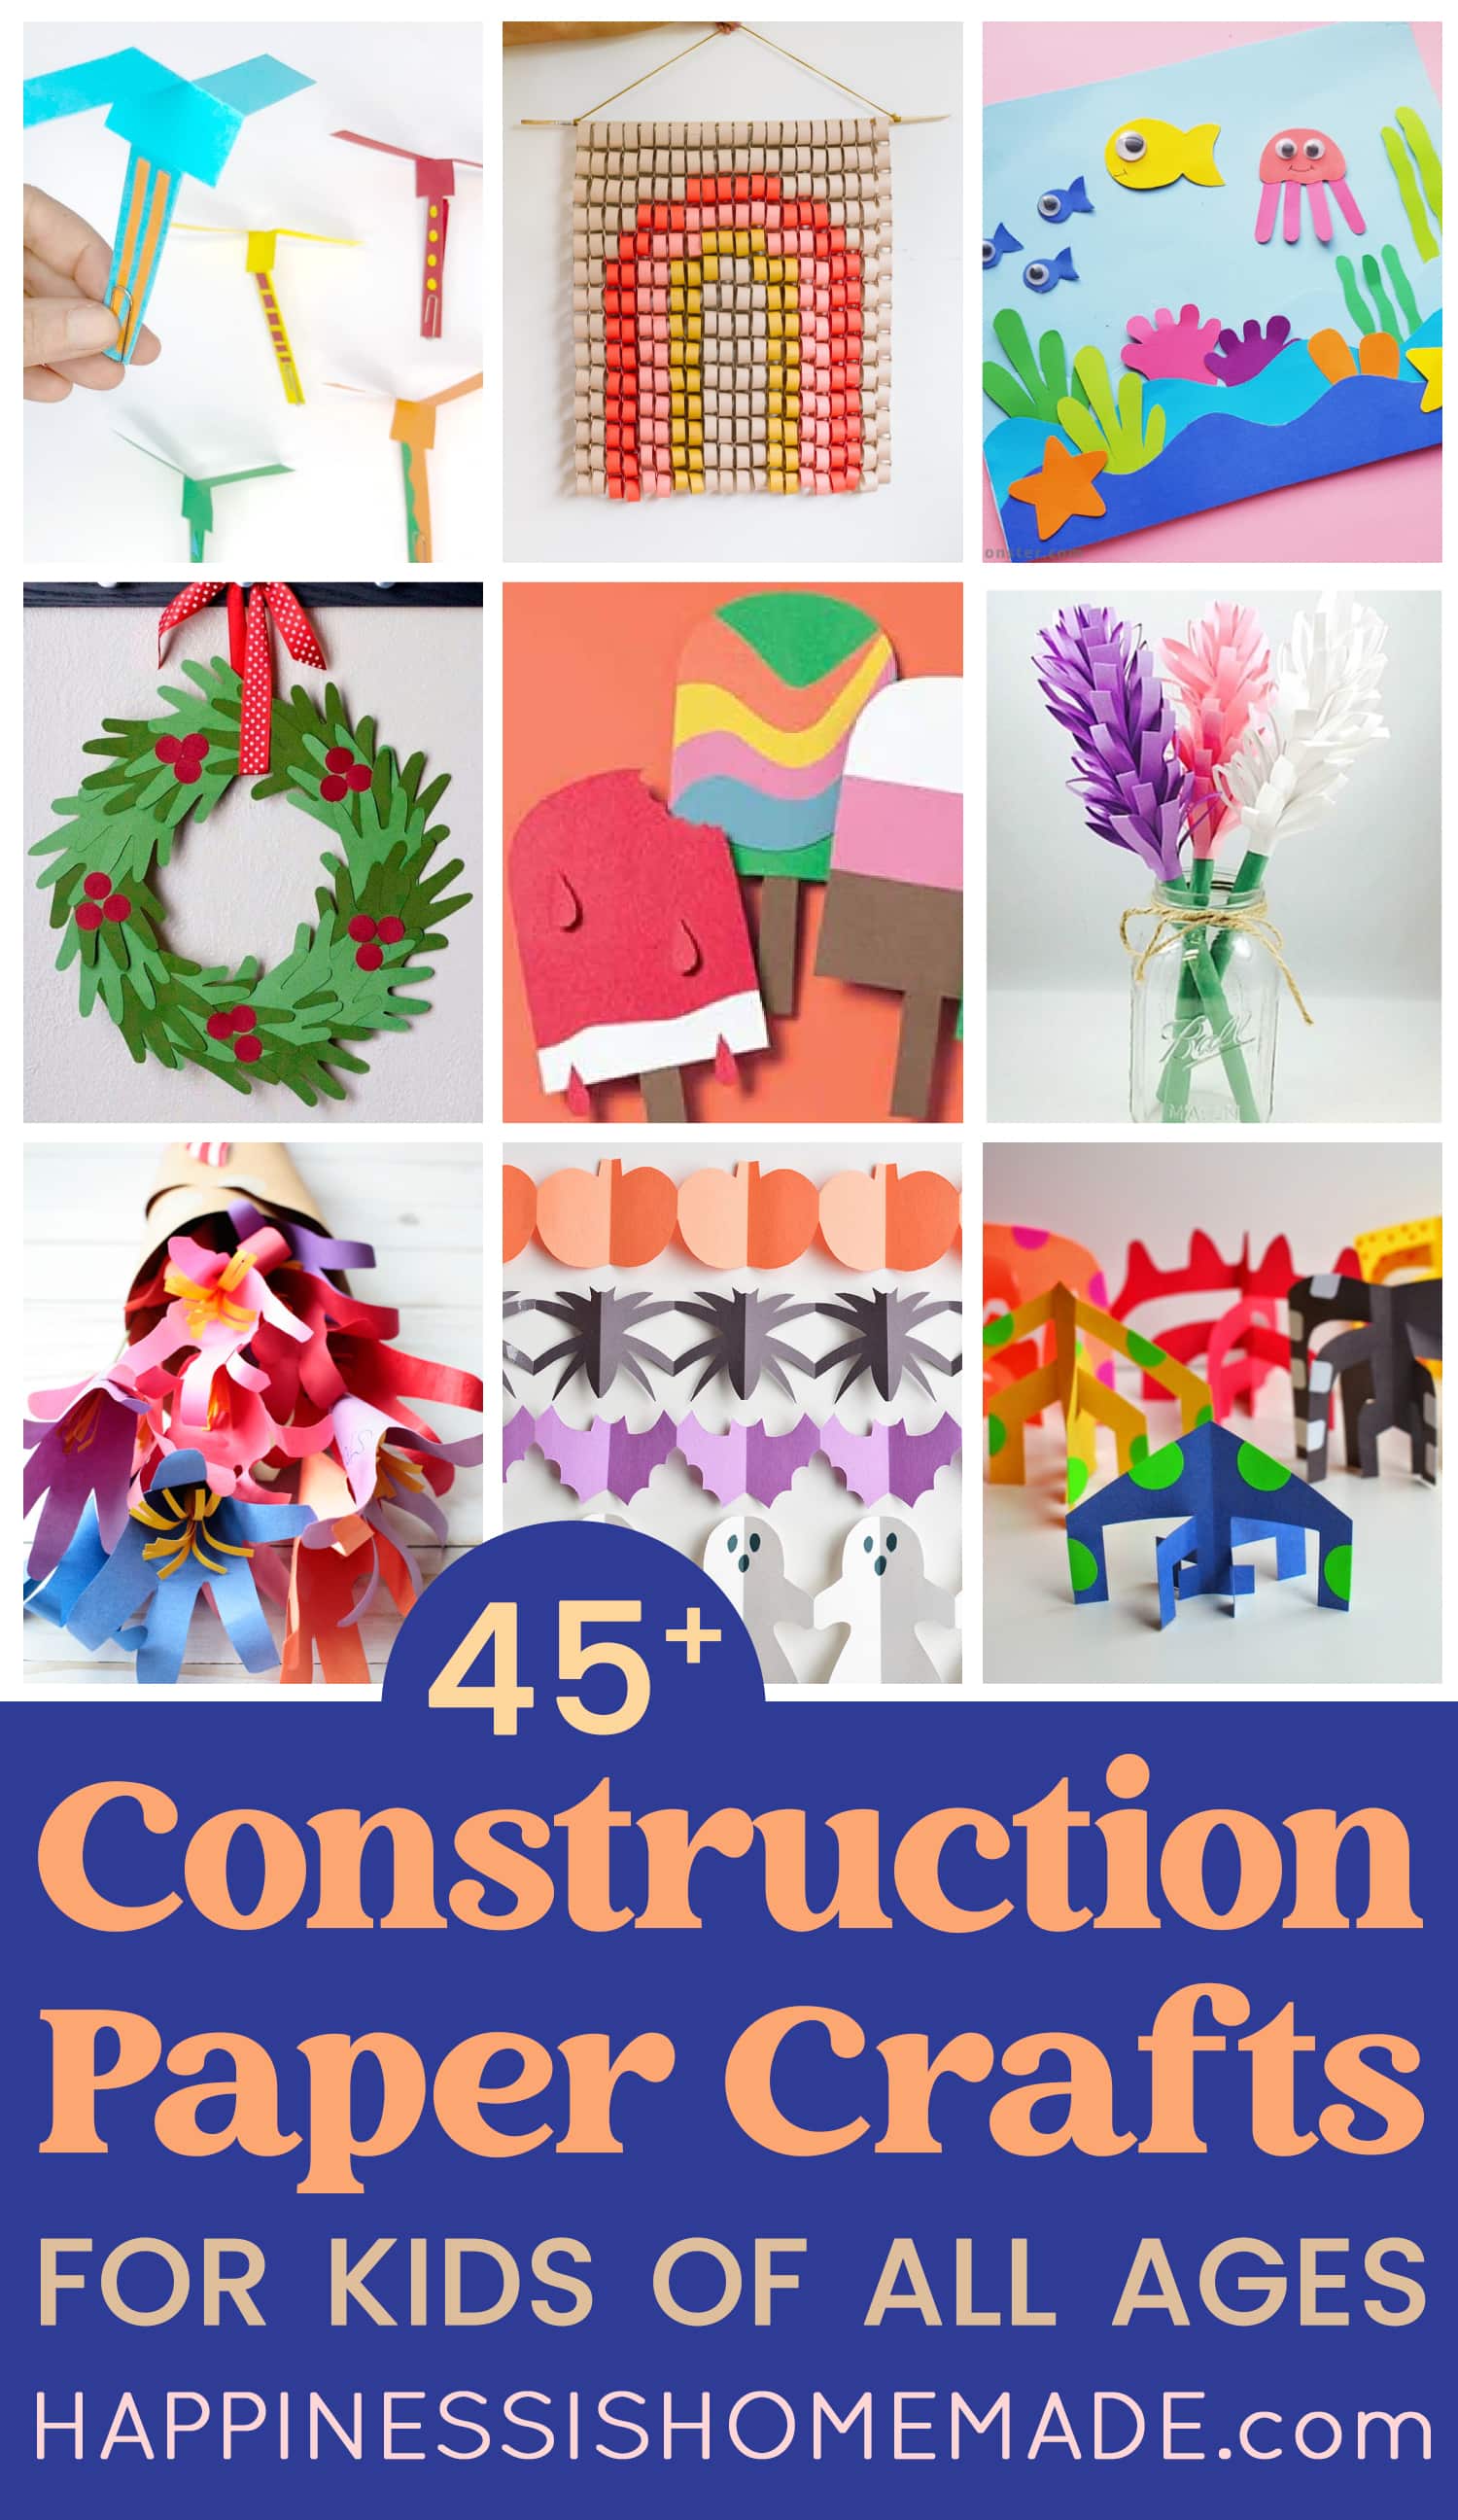 https://www.happinessishomemade.net/wp-content/uploads/2022/09/Easy-and-Fun-Construction-Paper-Crafts-for-Kids.jpg